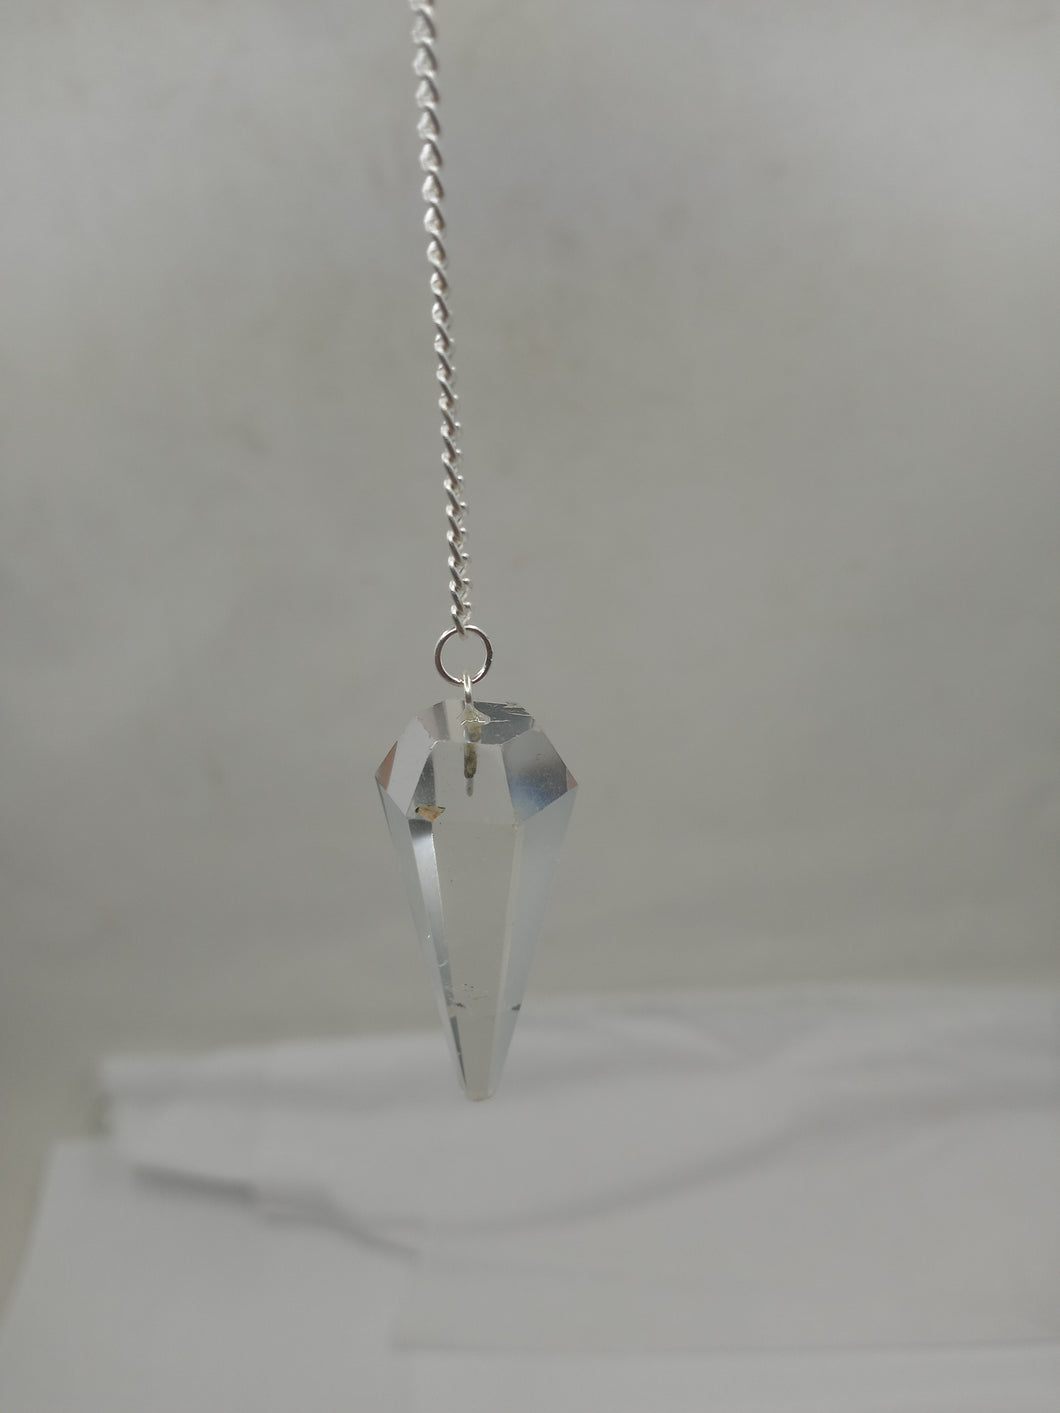 A beautiful clear quartz pendulum with a faceted point. The pendulum hangs from a silver chain with a small clasp at the top.